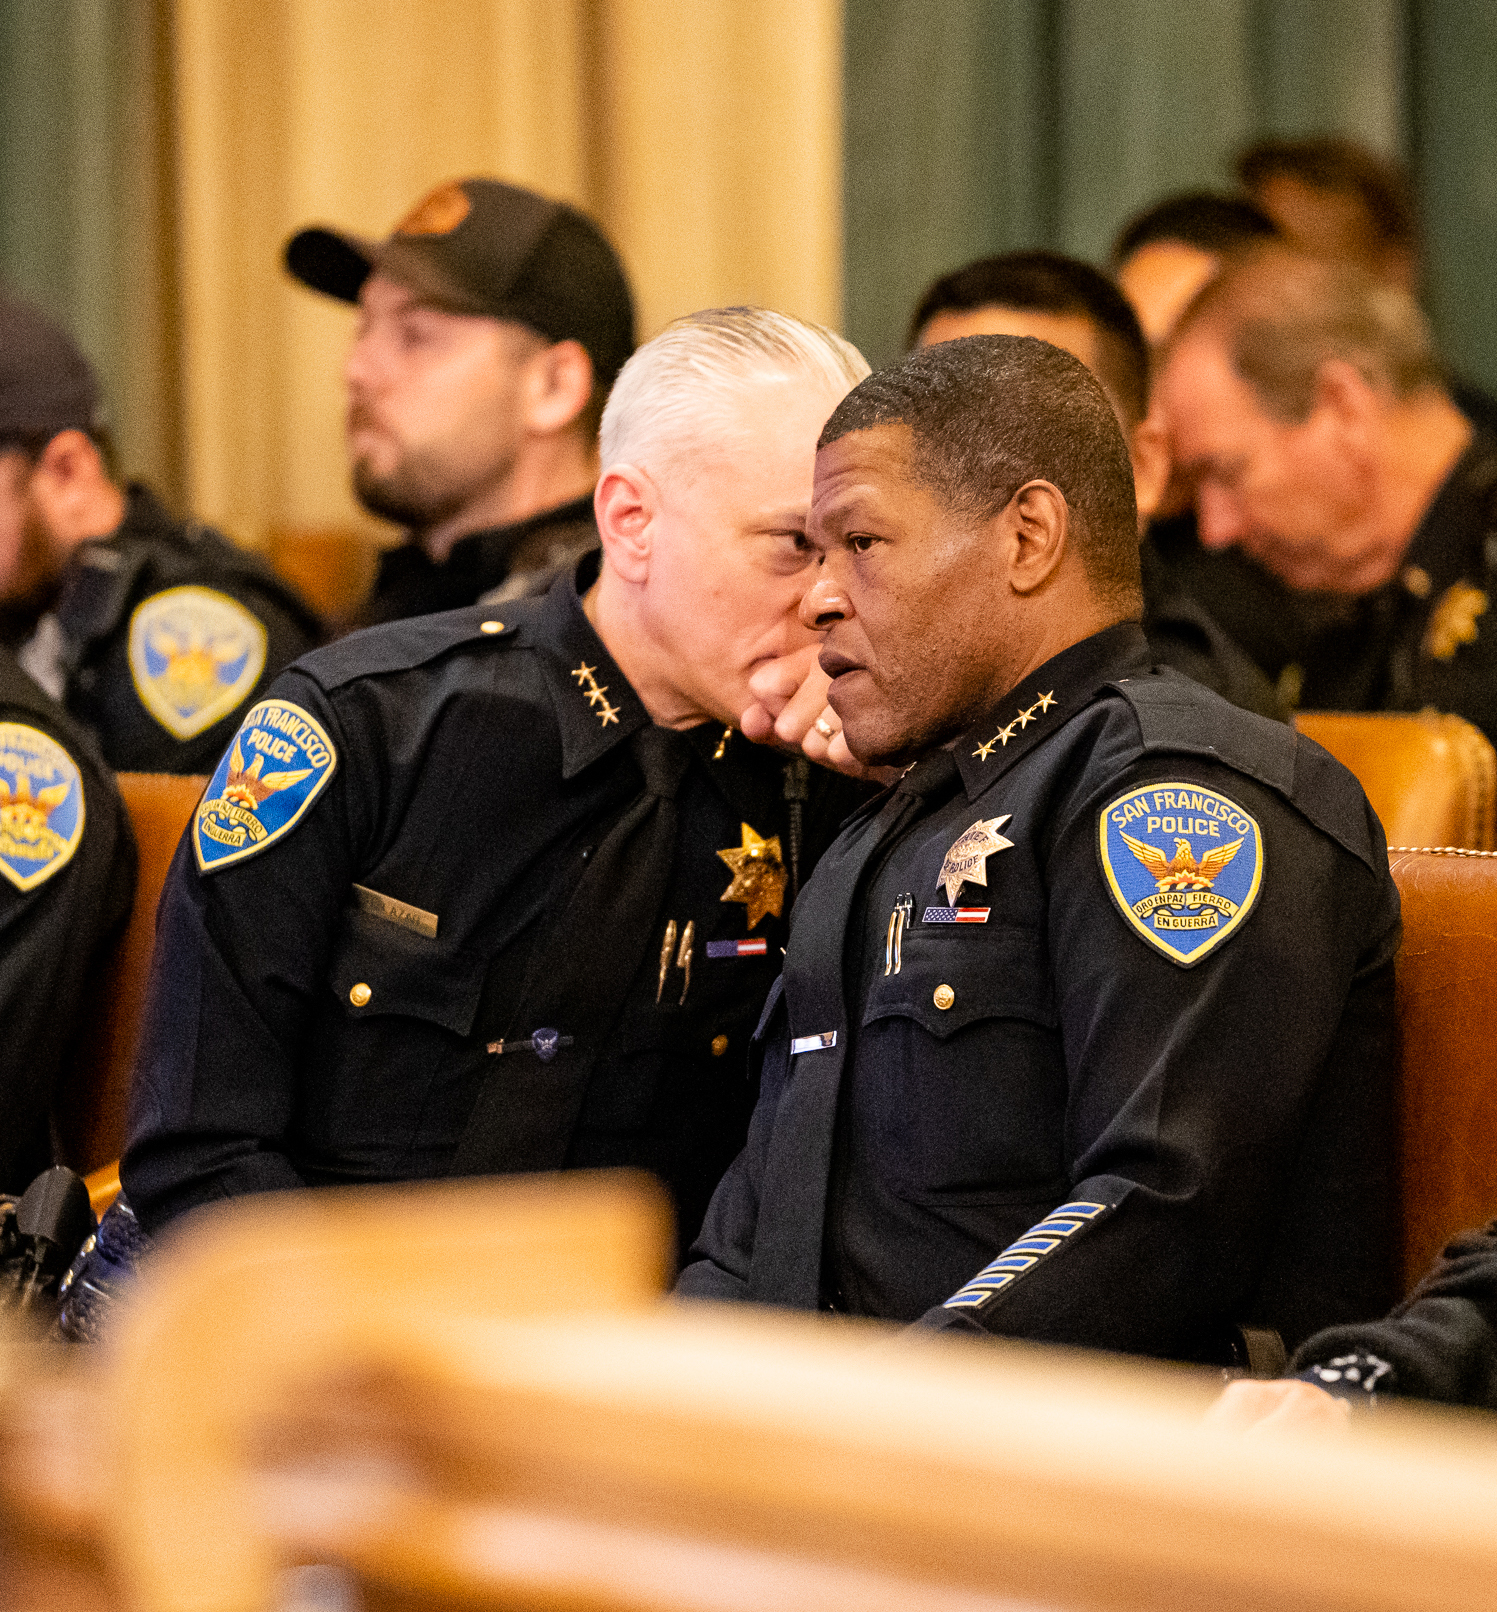 Two police officers in uniform sitting closely and conversing in the Board of Supervisors chambers, with several other uniformed officers seated in the background.